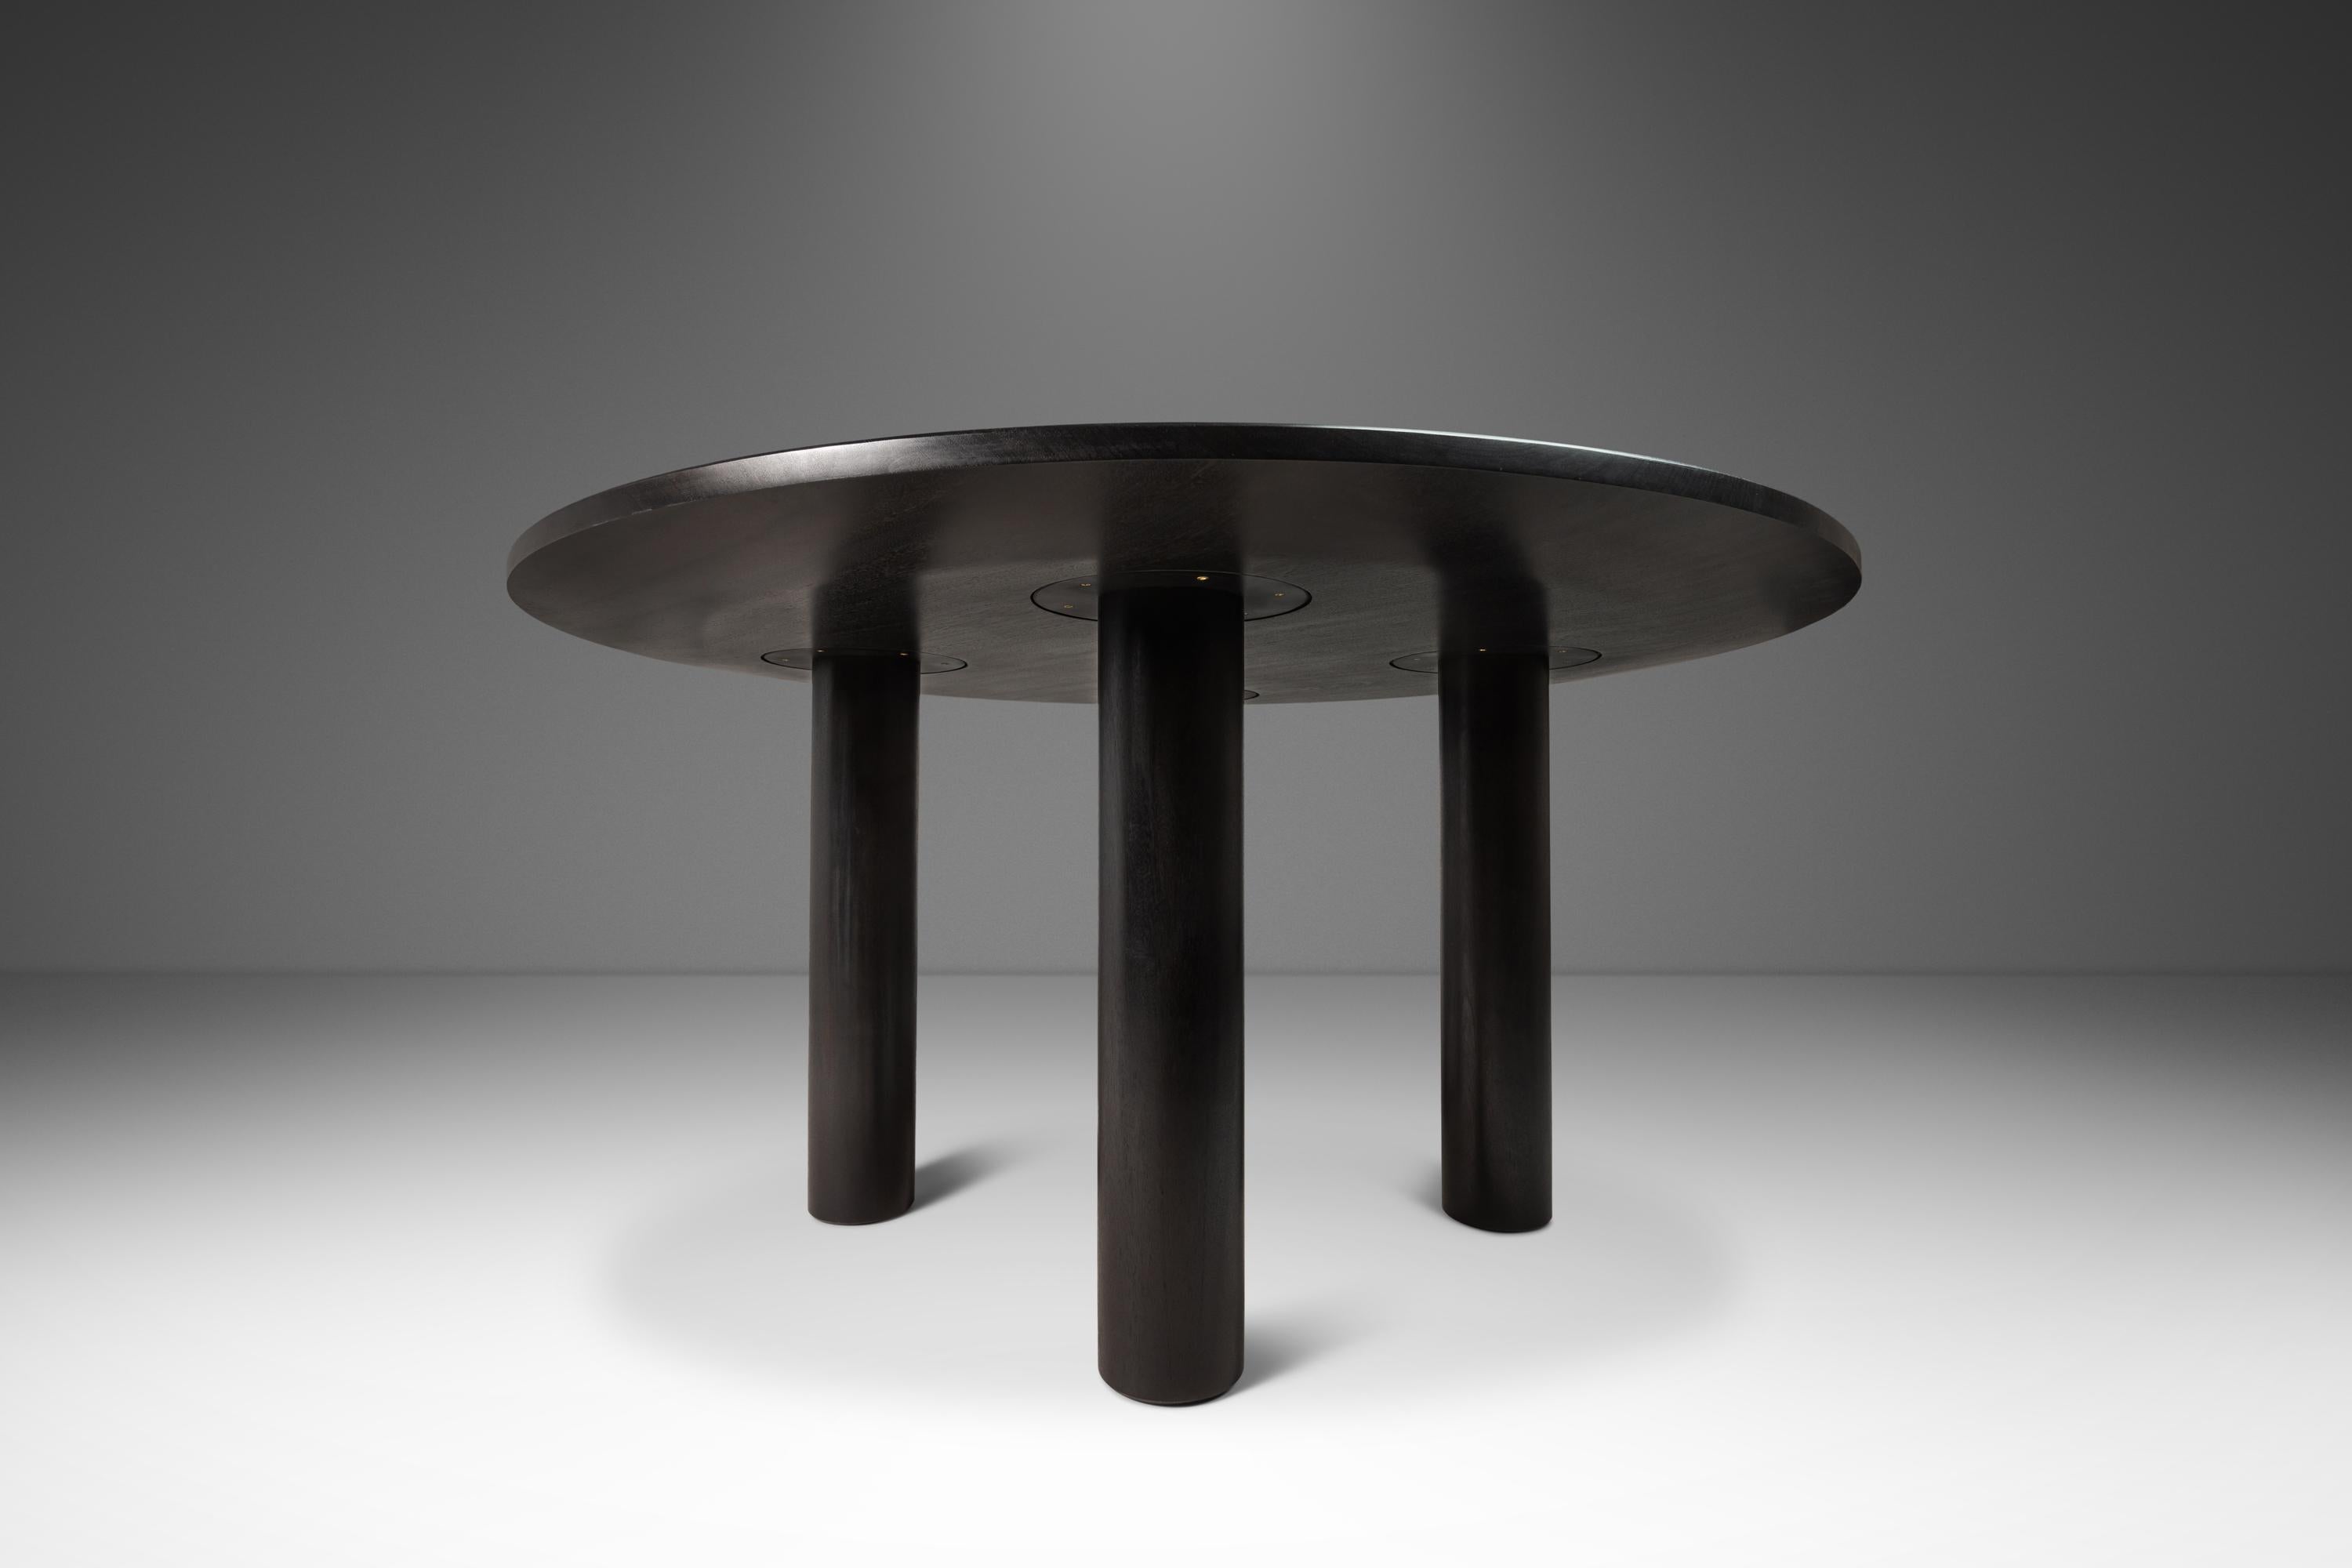  Introduce your home to a touch of organic elegance with this one-of-a-kind dining table by Mark LeBlanc. Masterfully crafted from a rare and intentionally sourced piece of 3